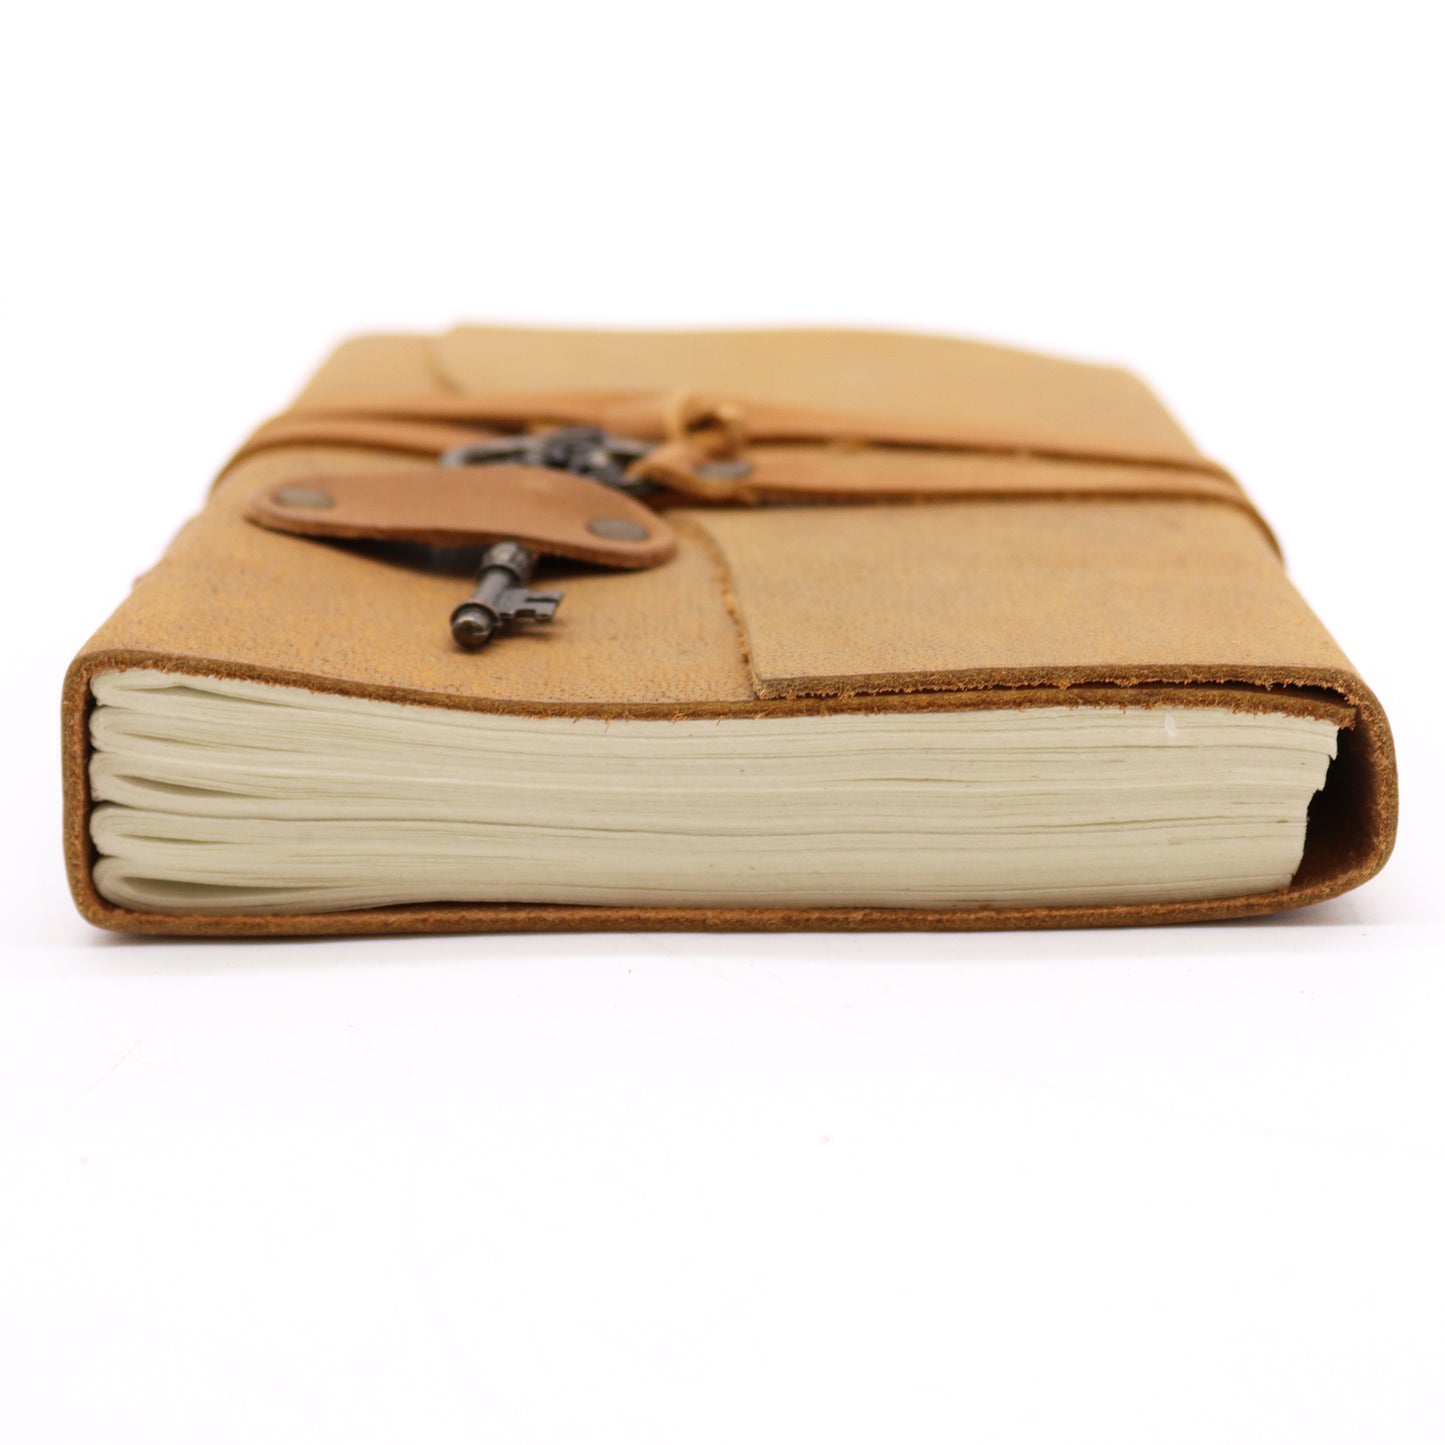 Oiled Tan Leather & Key - 200 pages - 13x18cm